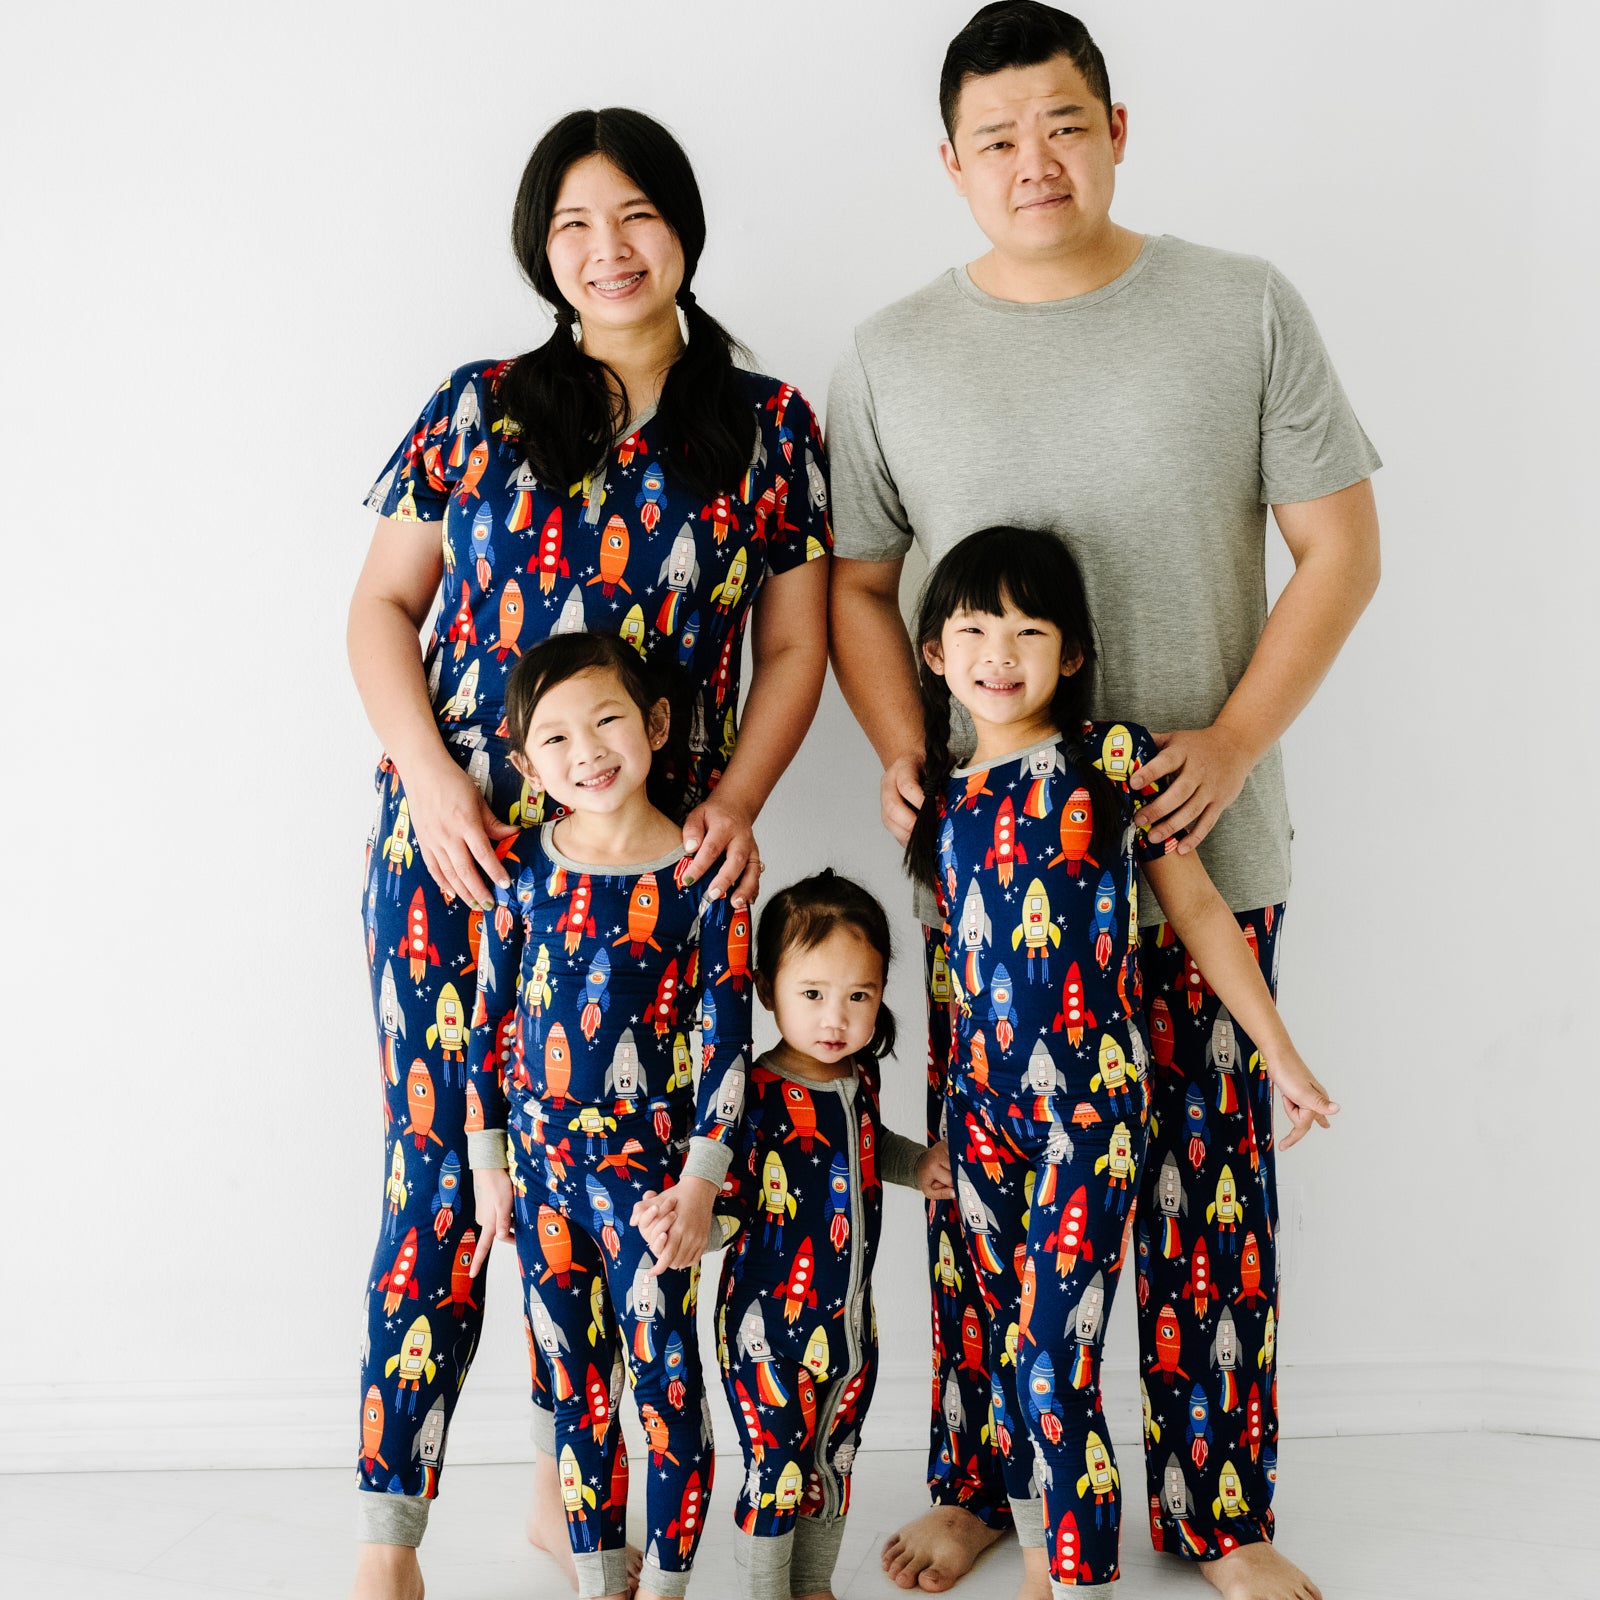 Family of four posing together wearing matching Navy Space Explorer pajama sets. Mom is wearing women's Navy Space Explorer women's pajama top paired with matching women's pajama pants. Dad is wearing a solid heather gray men's pajama top paired with men's Navy Space Explorer pajama pants. Their three children are wearing Navy Space Explorer pajama sets in two piece and zippy styles